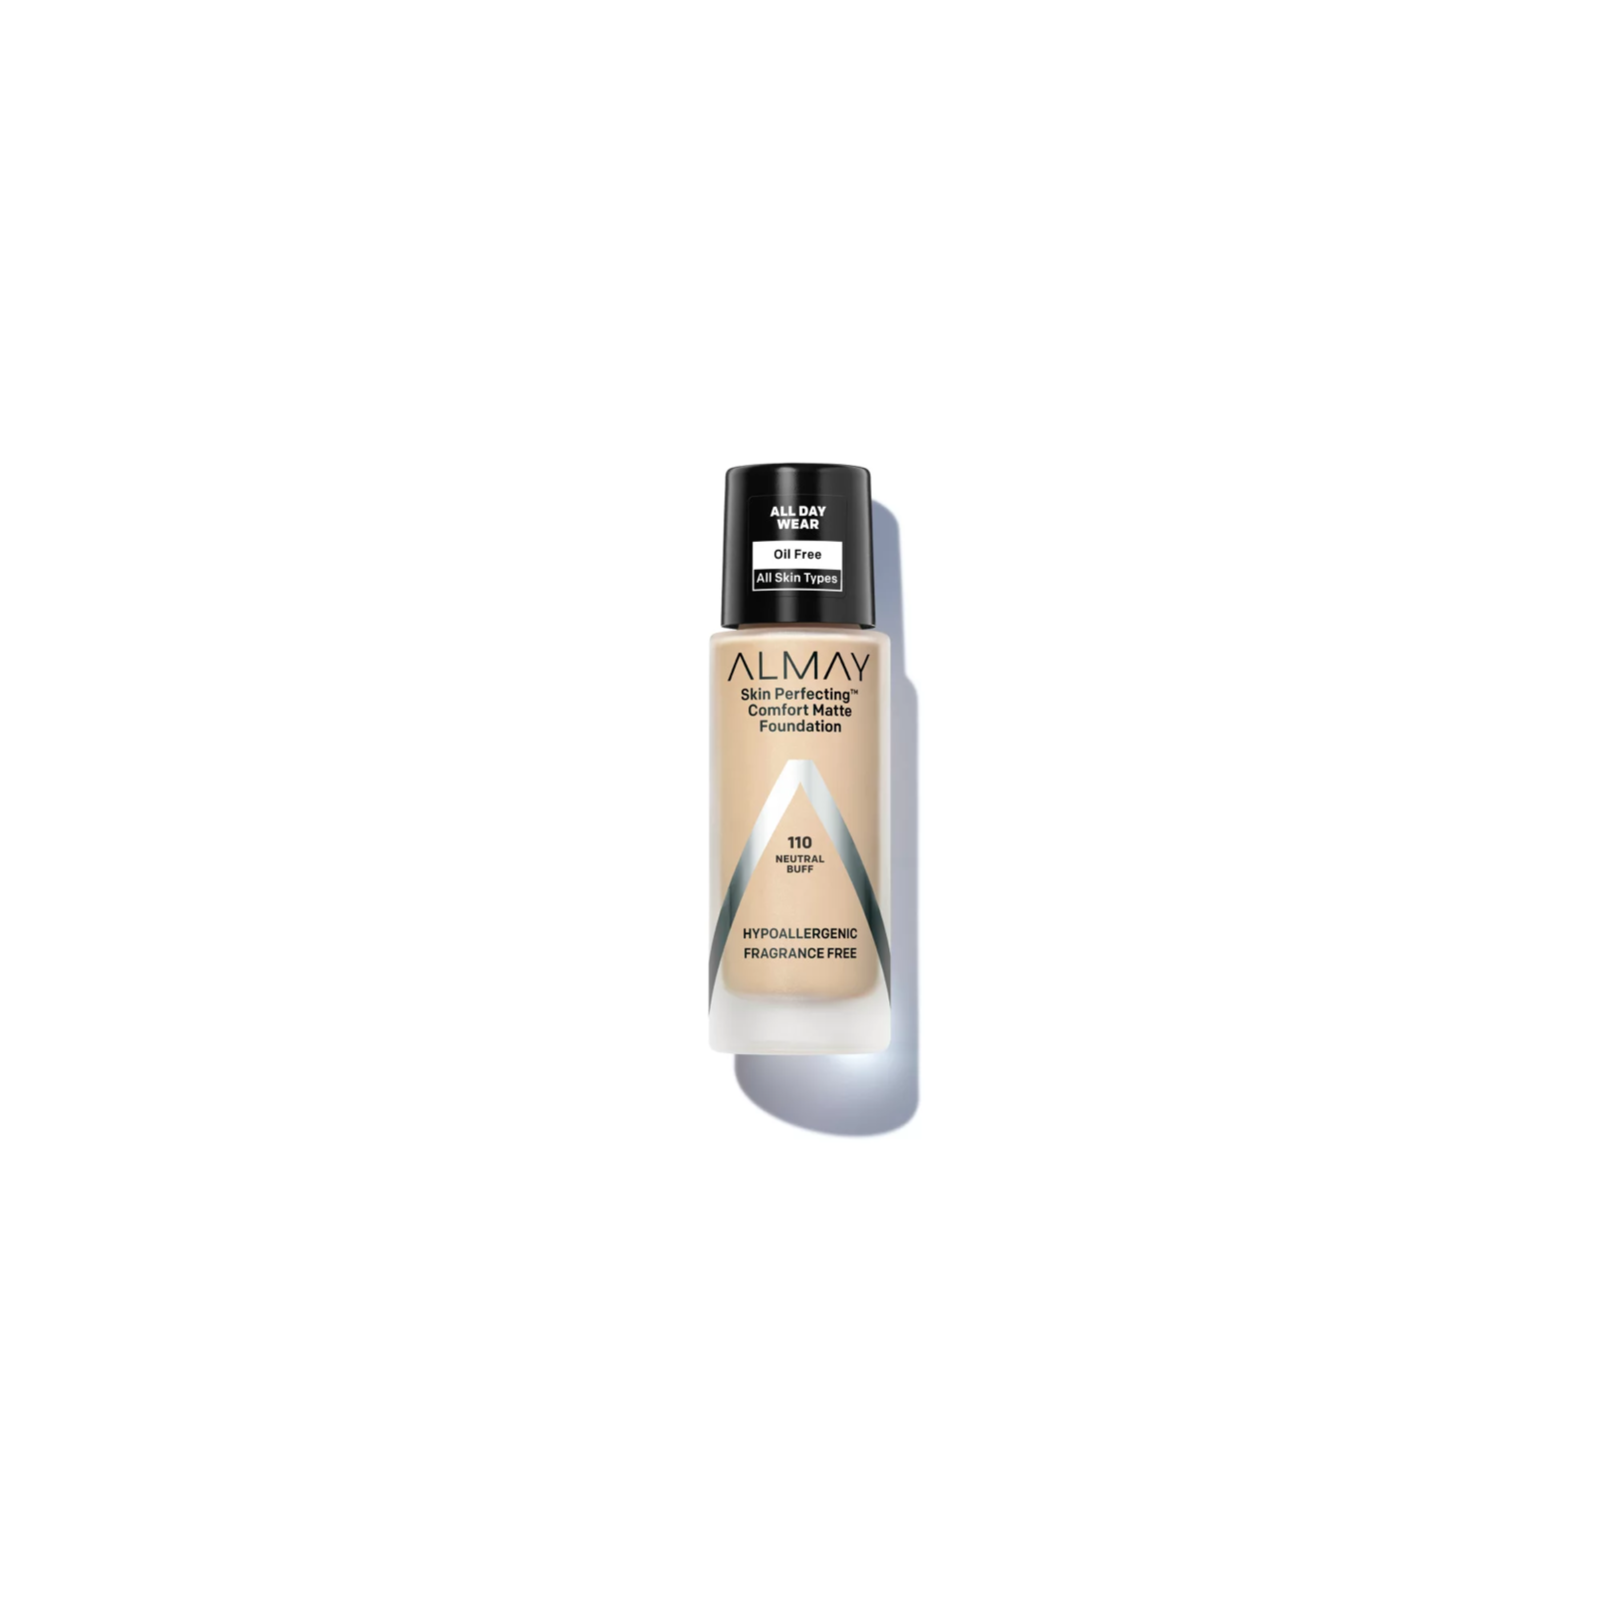 Primary image for Almay Skin Perfecting Comfort Matte Liquid Foundation 110 Neutral Buff 1 fl oz..